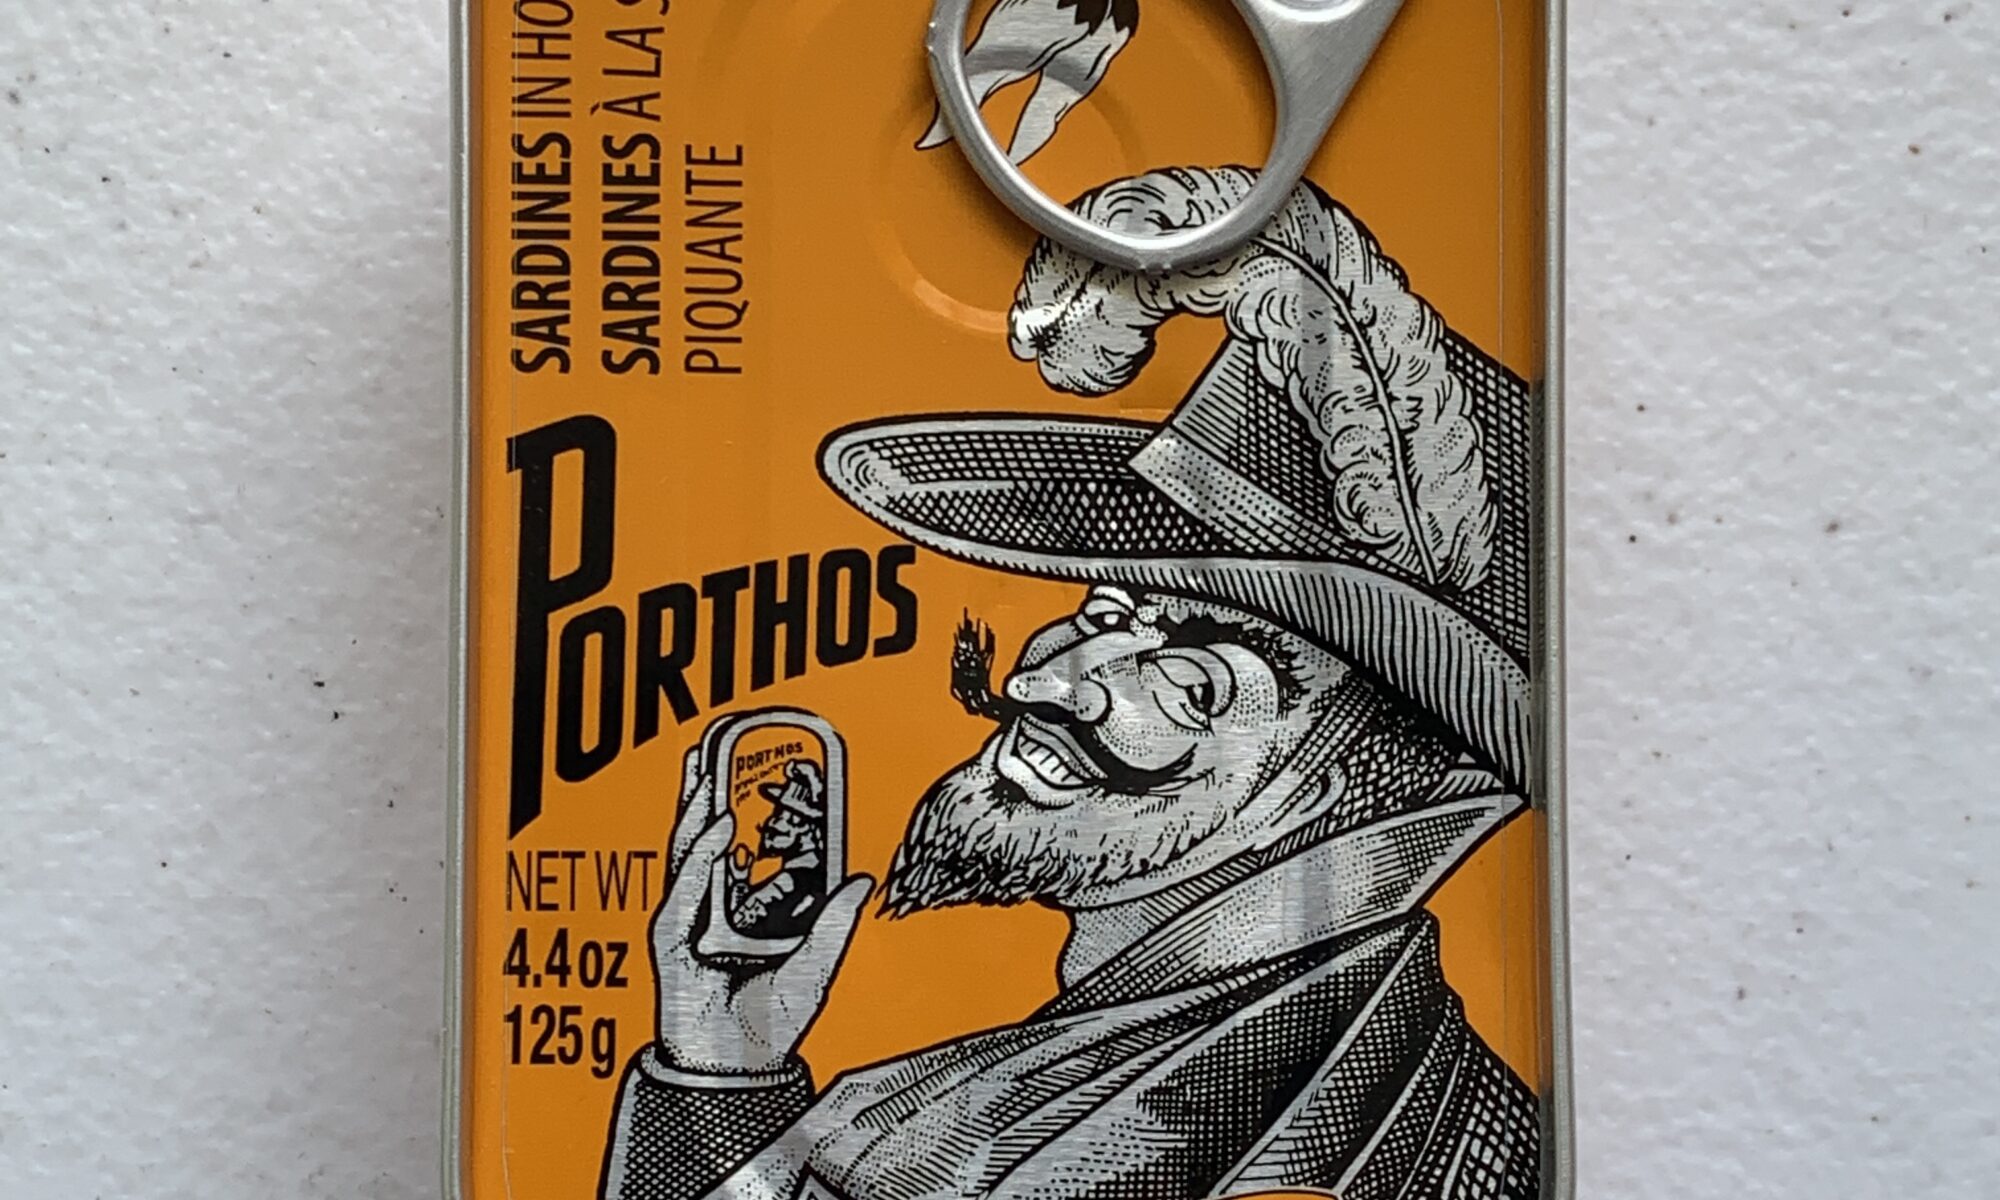 Image of the front of a tin of Porthos Sardines in Hot Tomato Sauce